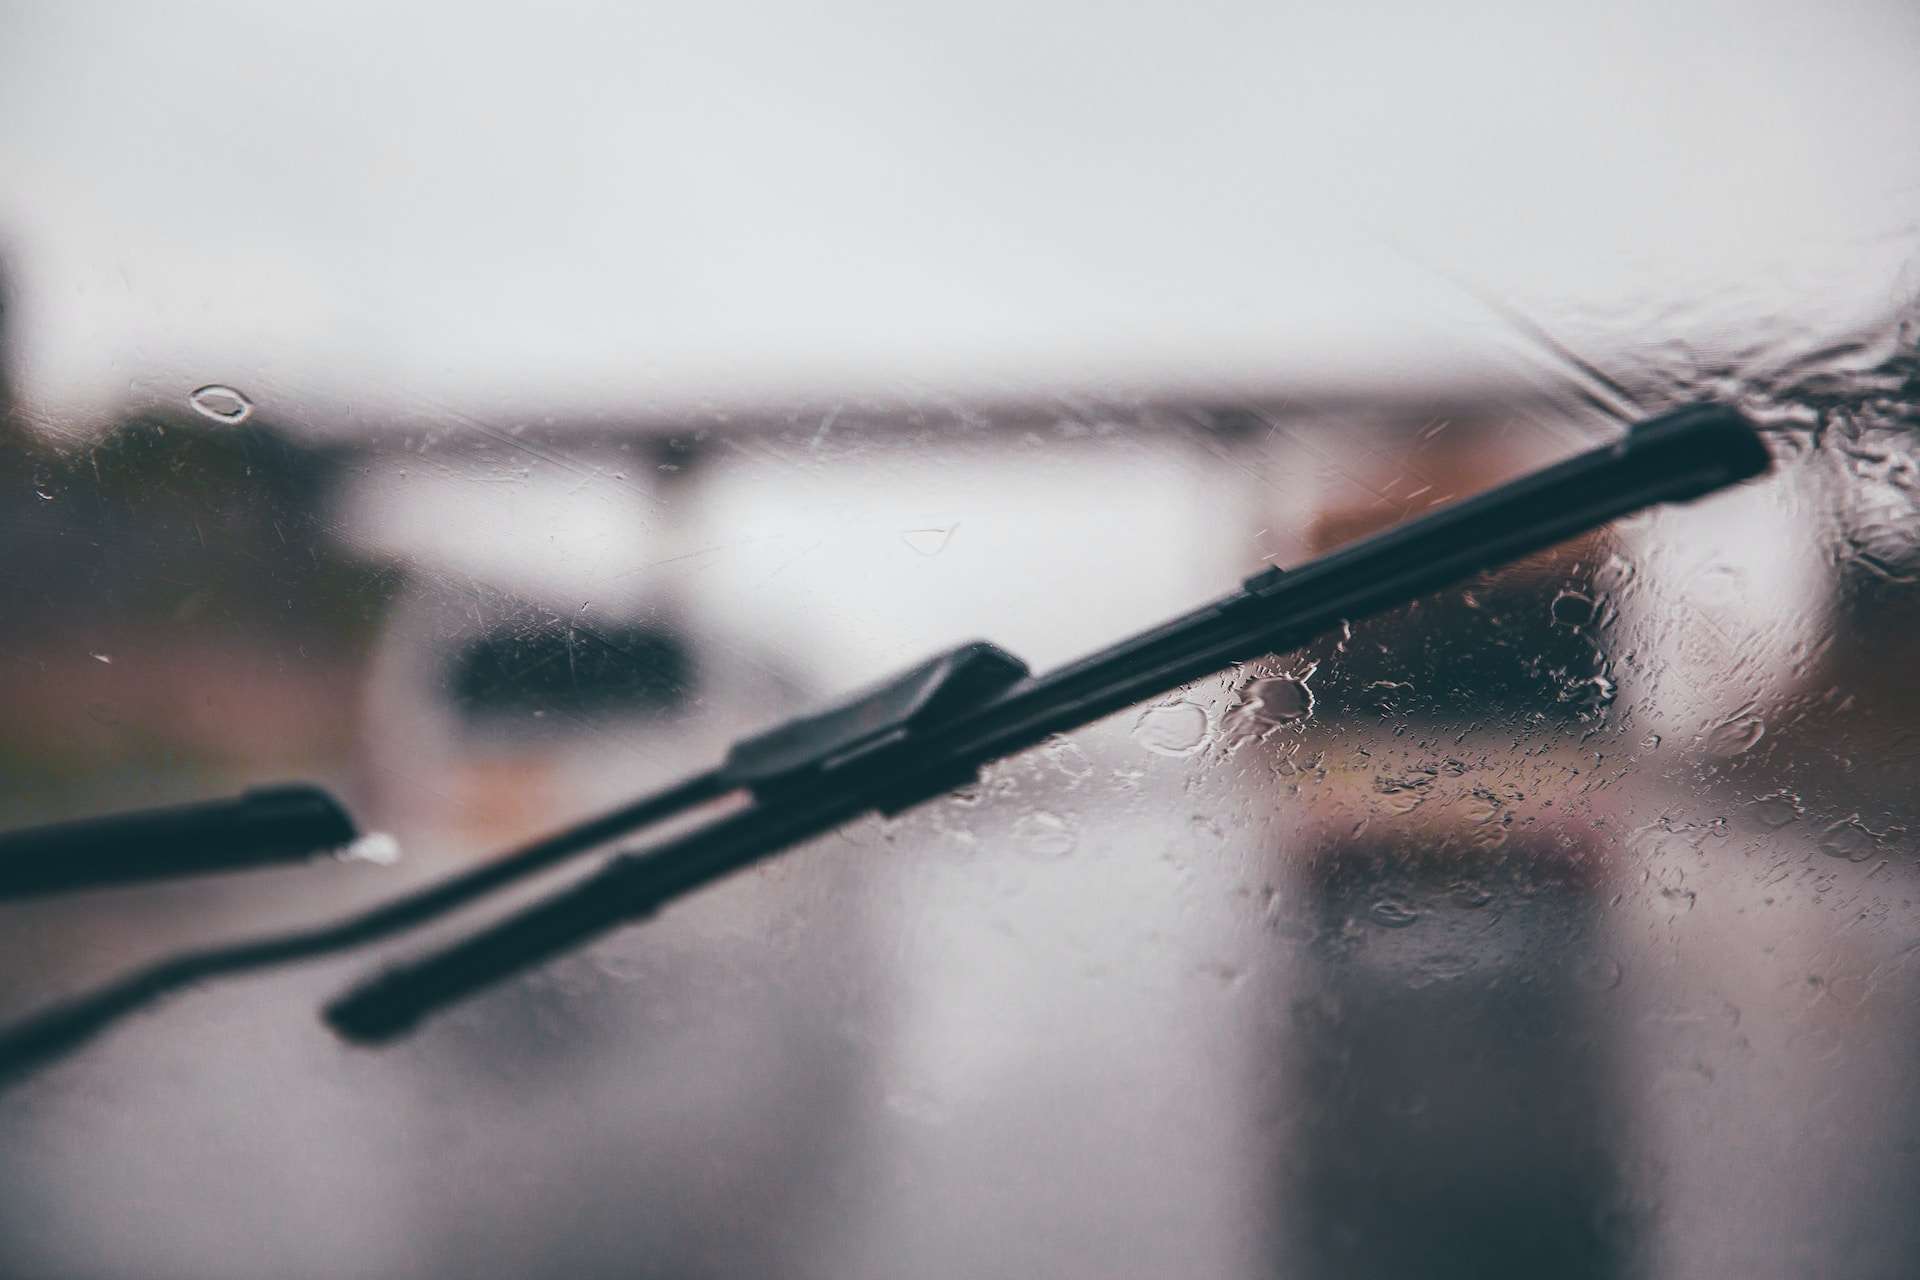 windshield wipers